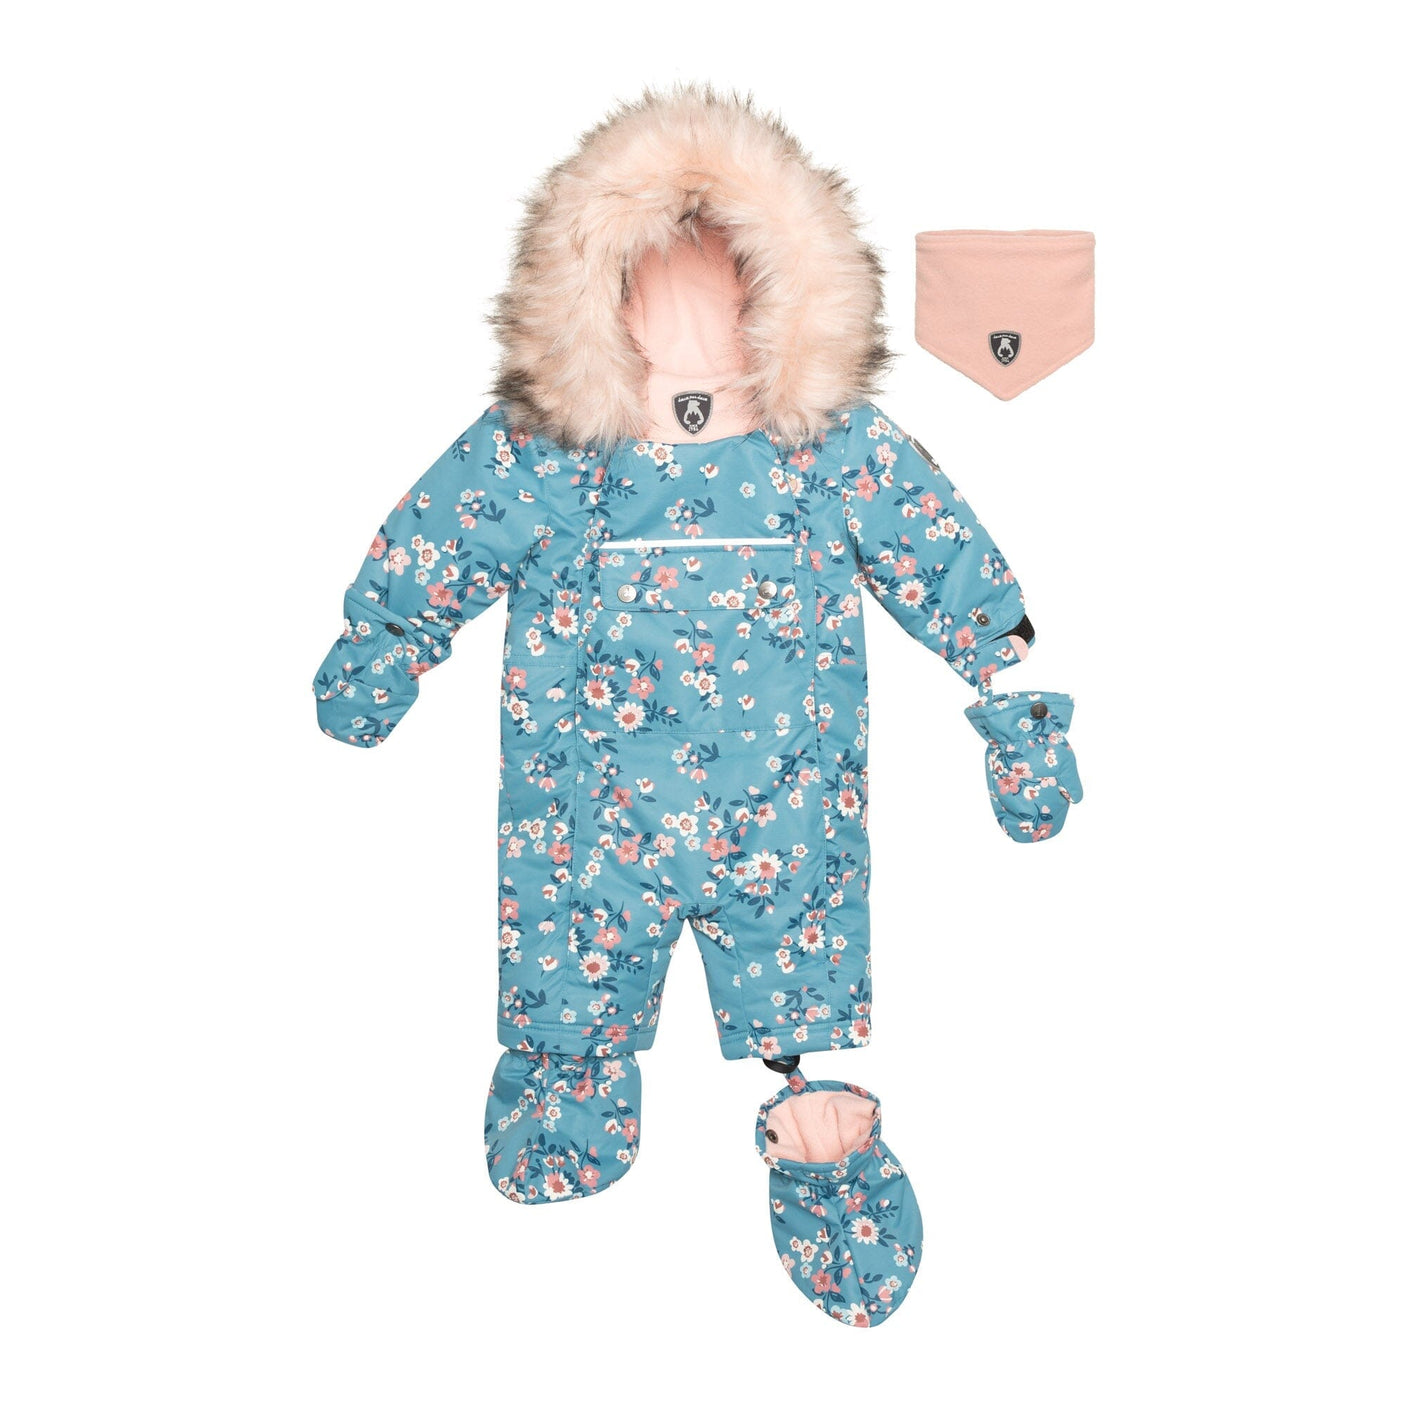 One Piece Baby Snowsuit With Spring Flower Print-0